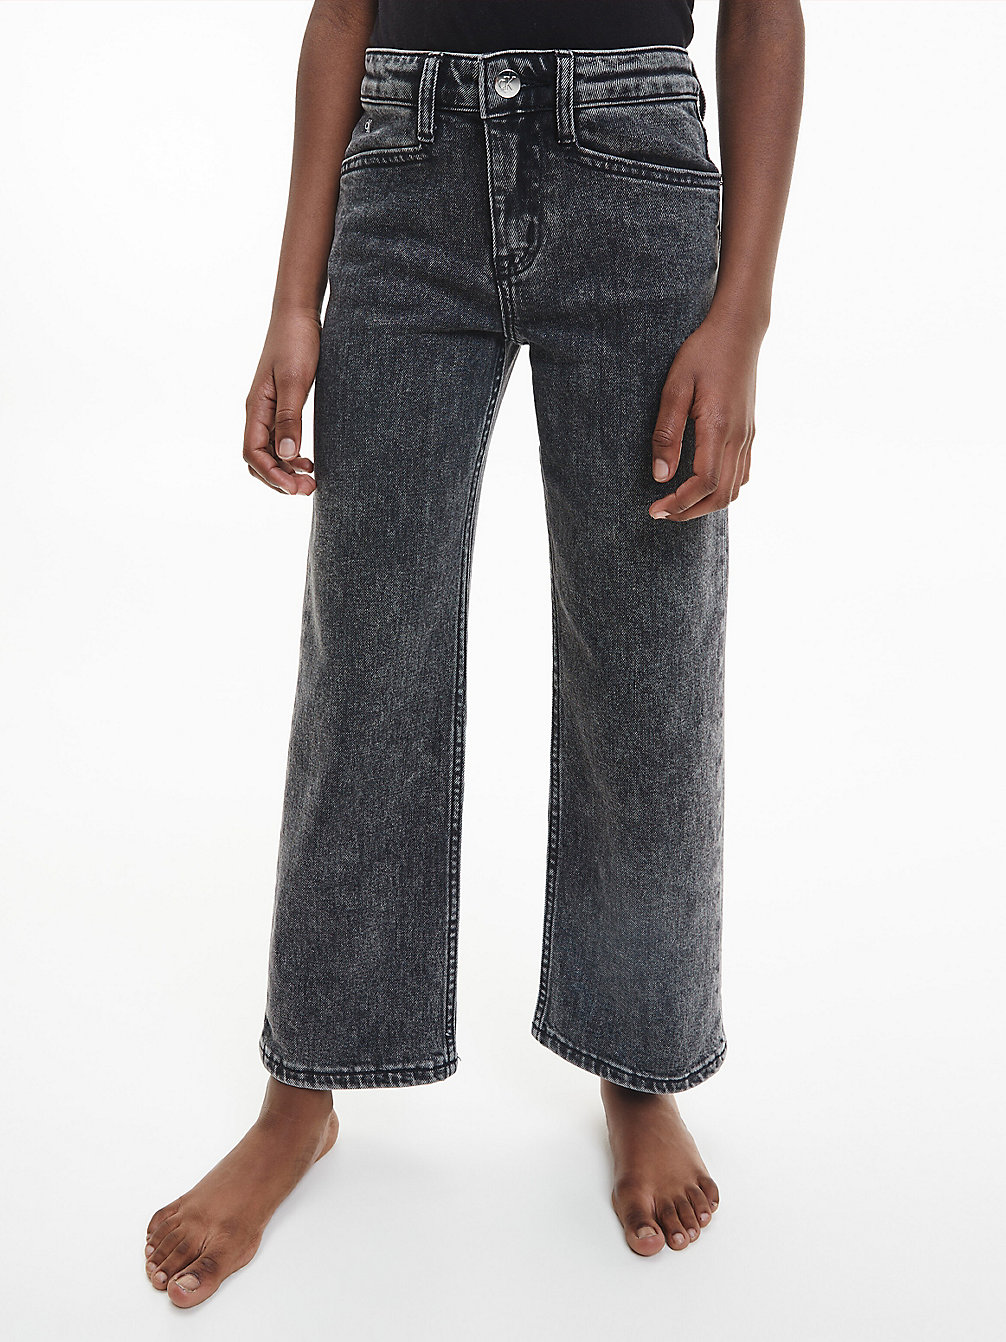 High Rise Wide Leg Jeans > WASHED GREY > undefined girls > Calvin Klein